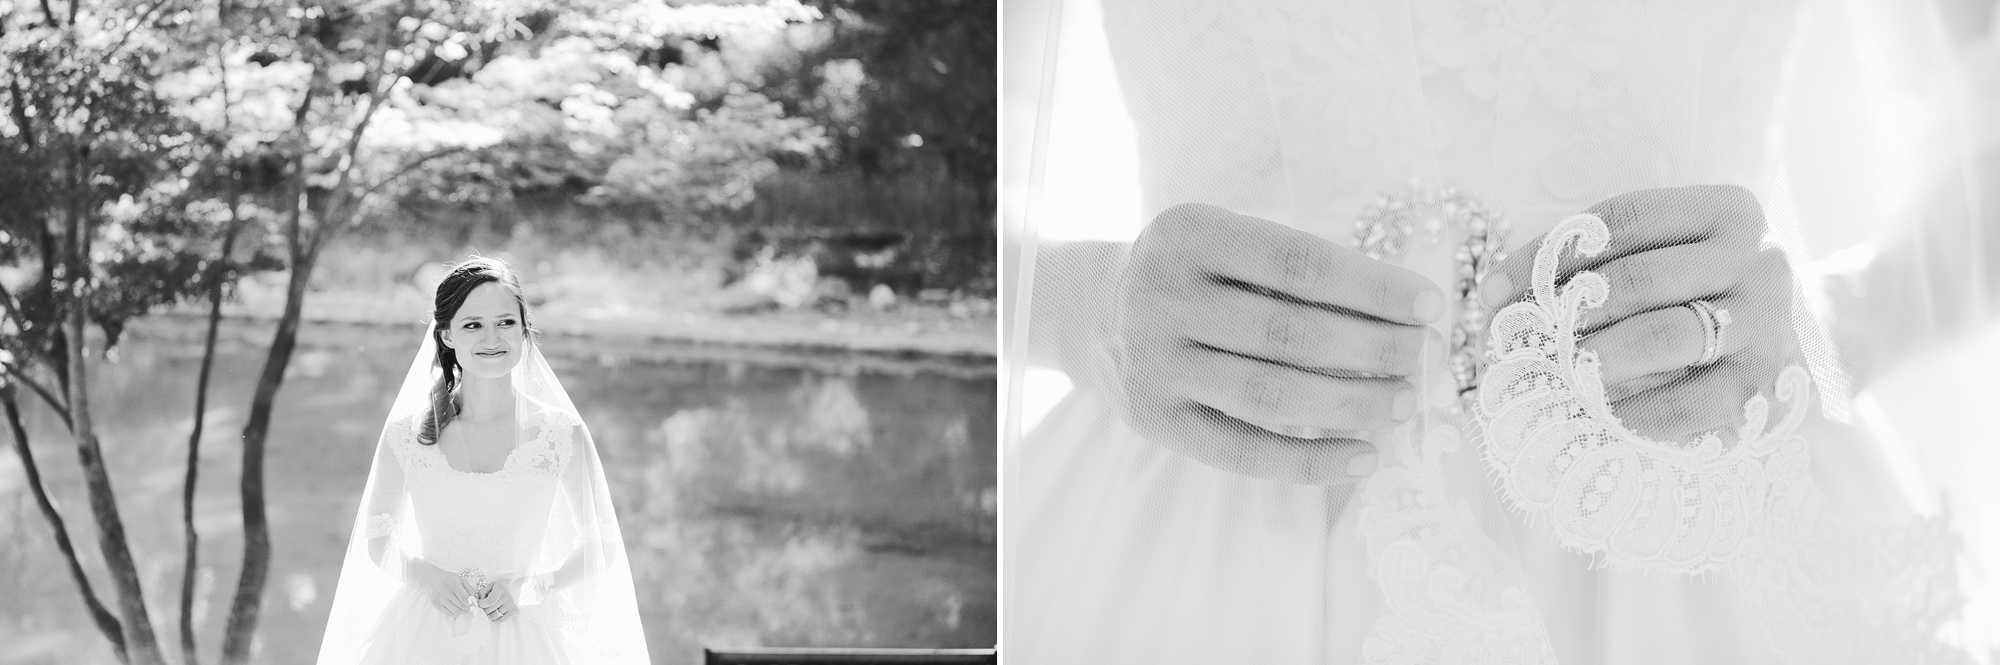 These are photos of annit and a detail photo of the lace on her veil.